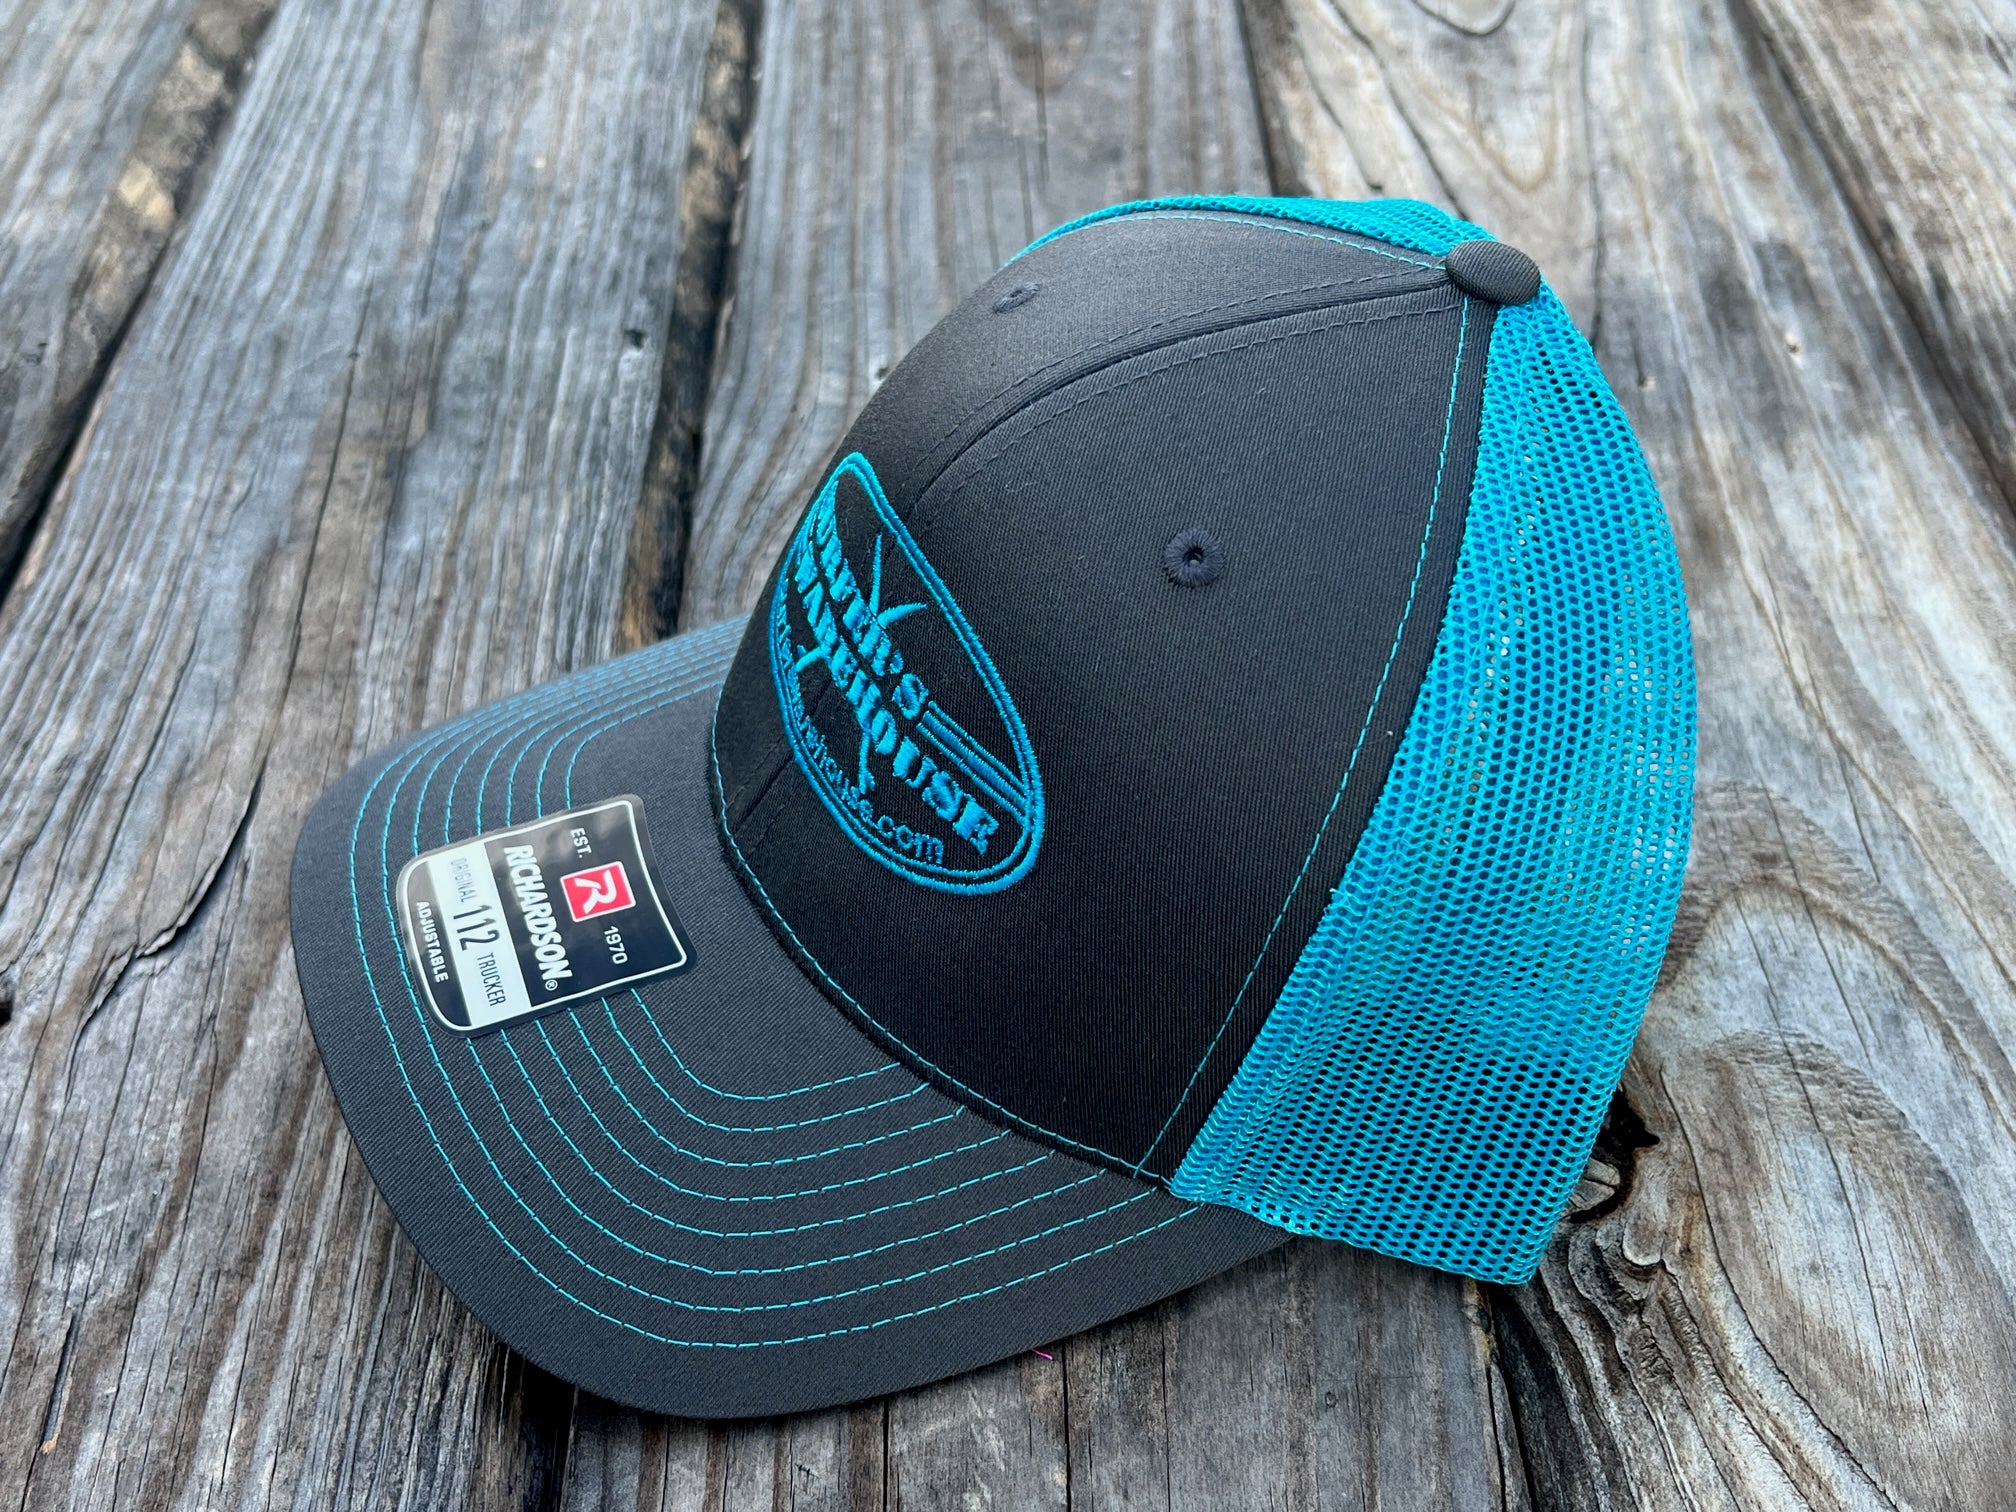 Hat Collection – (Surf Fishing) Solid colors Richardson 112